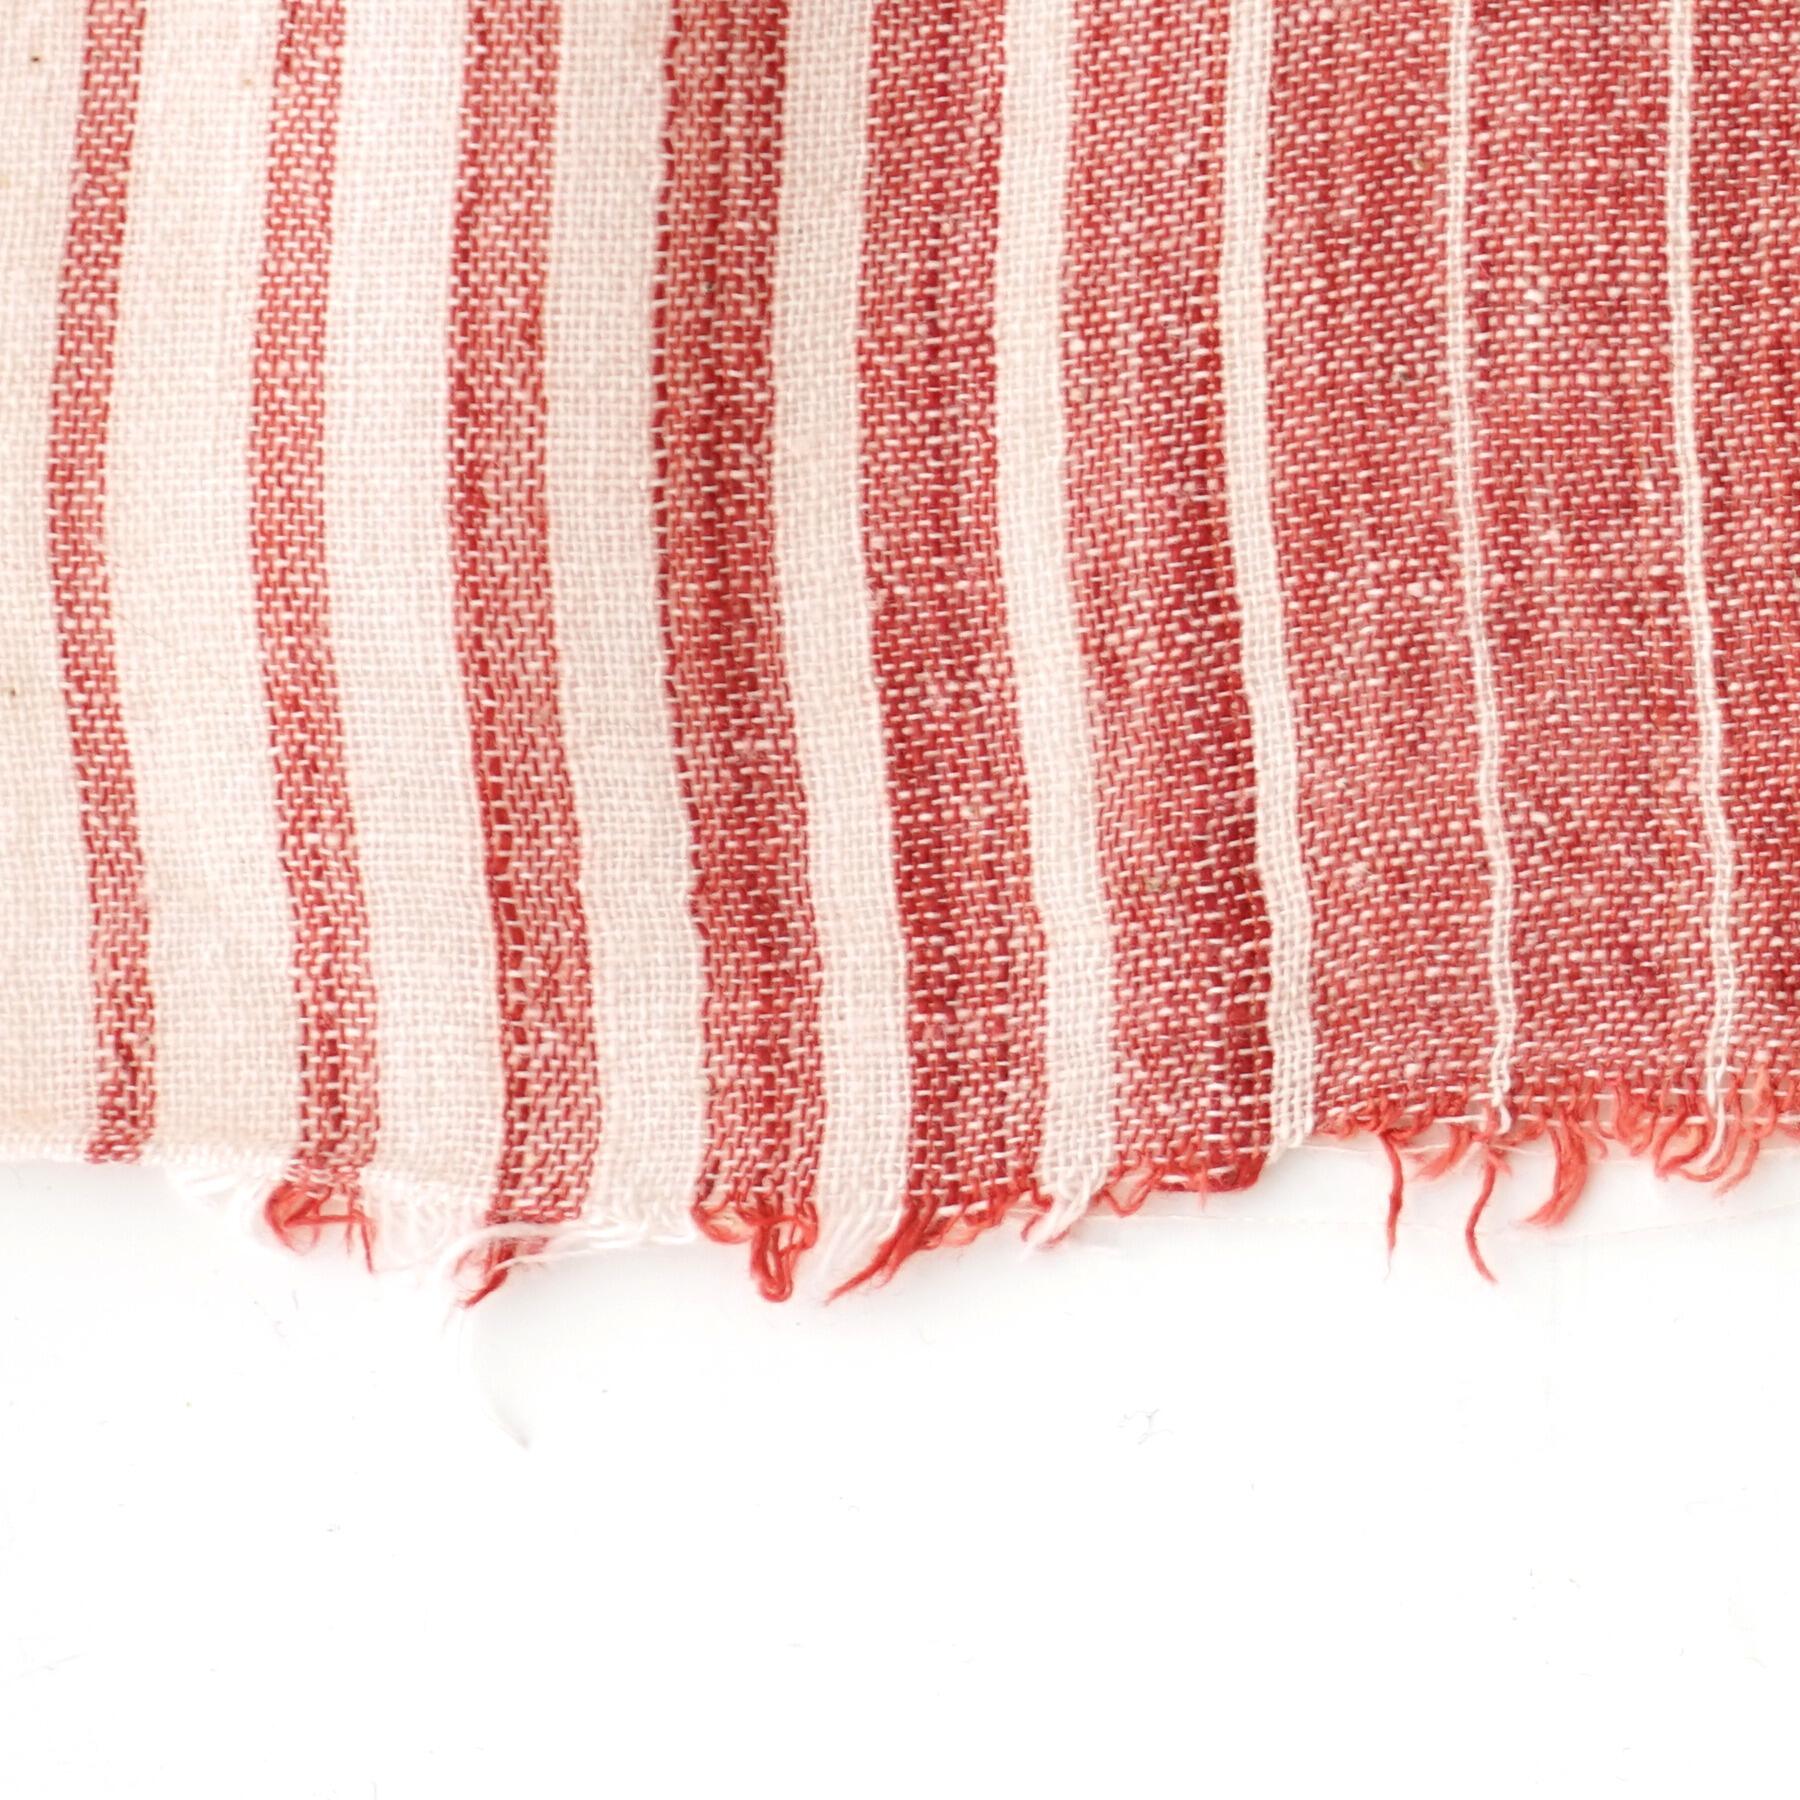 KHE04 - Organic Kala Cotton - Handloom Woven - Natural Dye - Red Alizarin Dye - Fading Stripes - One By One - Close Up